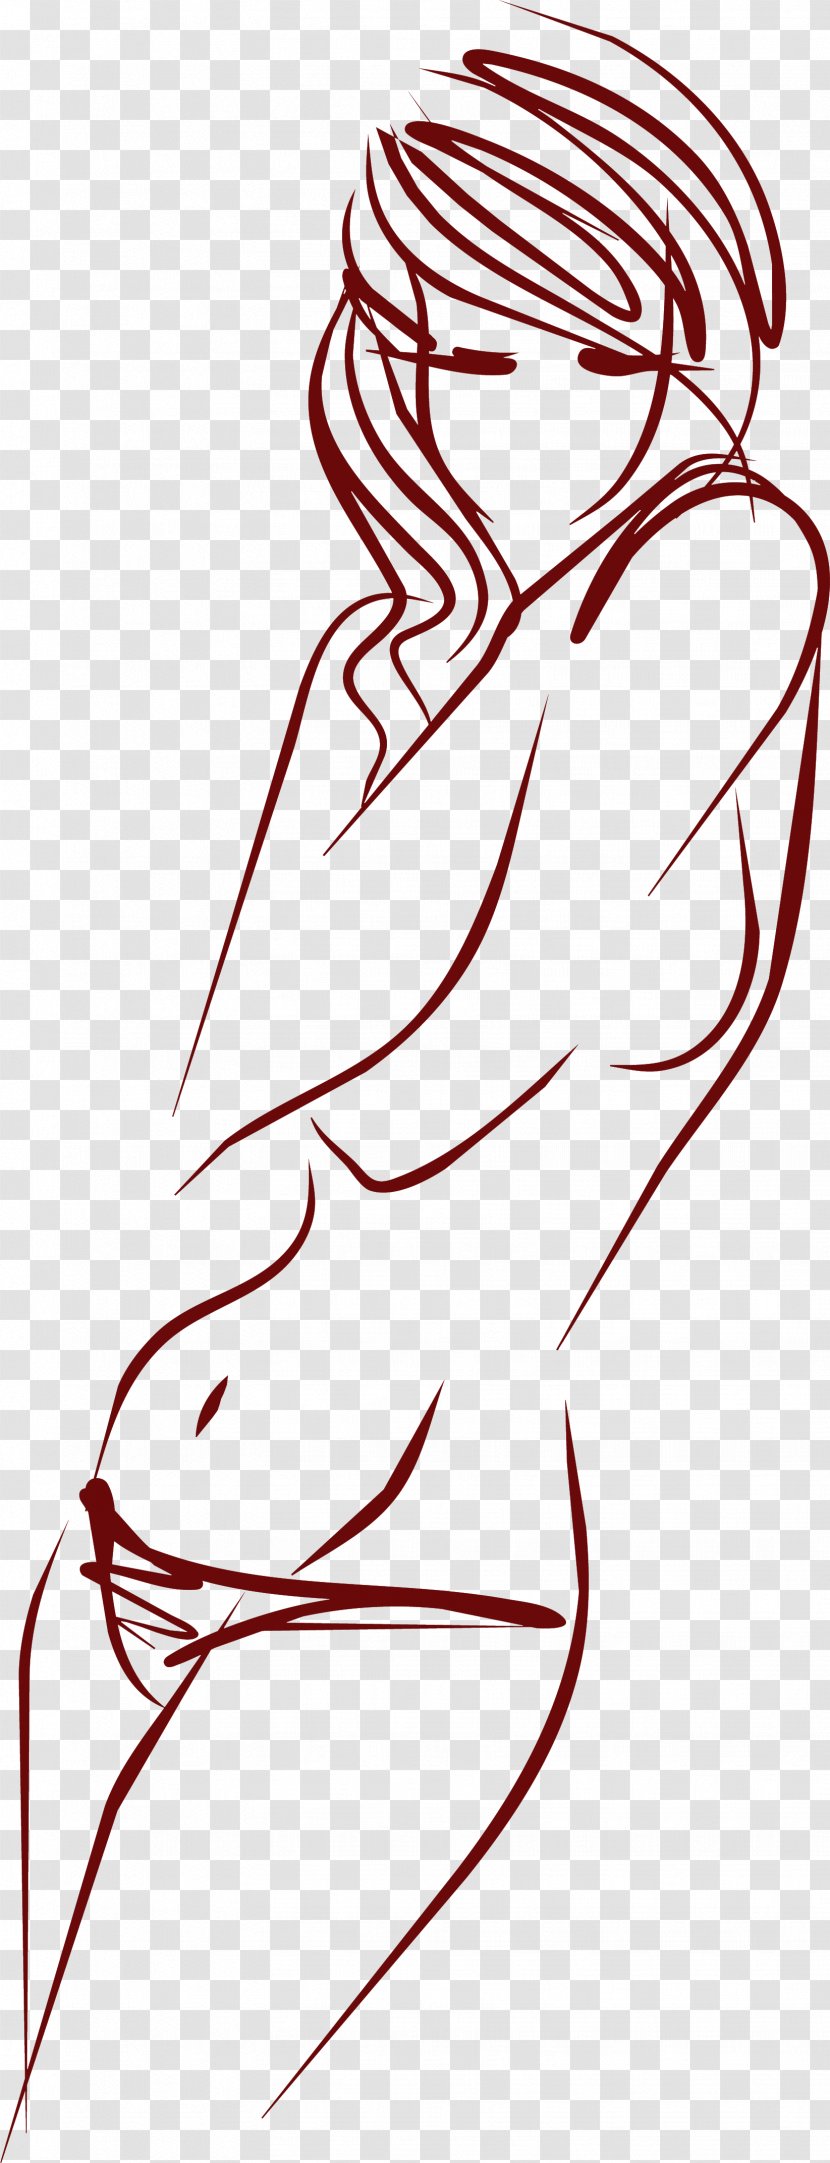 Pencil - Tail - Wing Elbow Transparent PNG